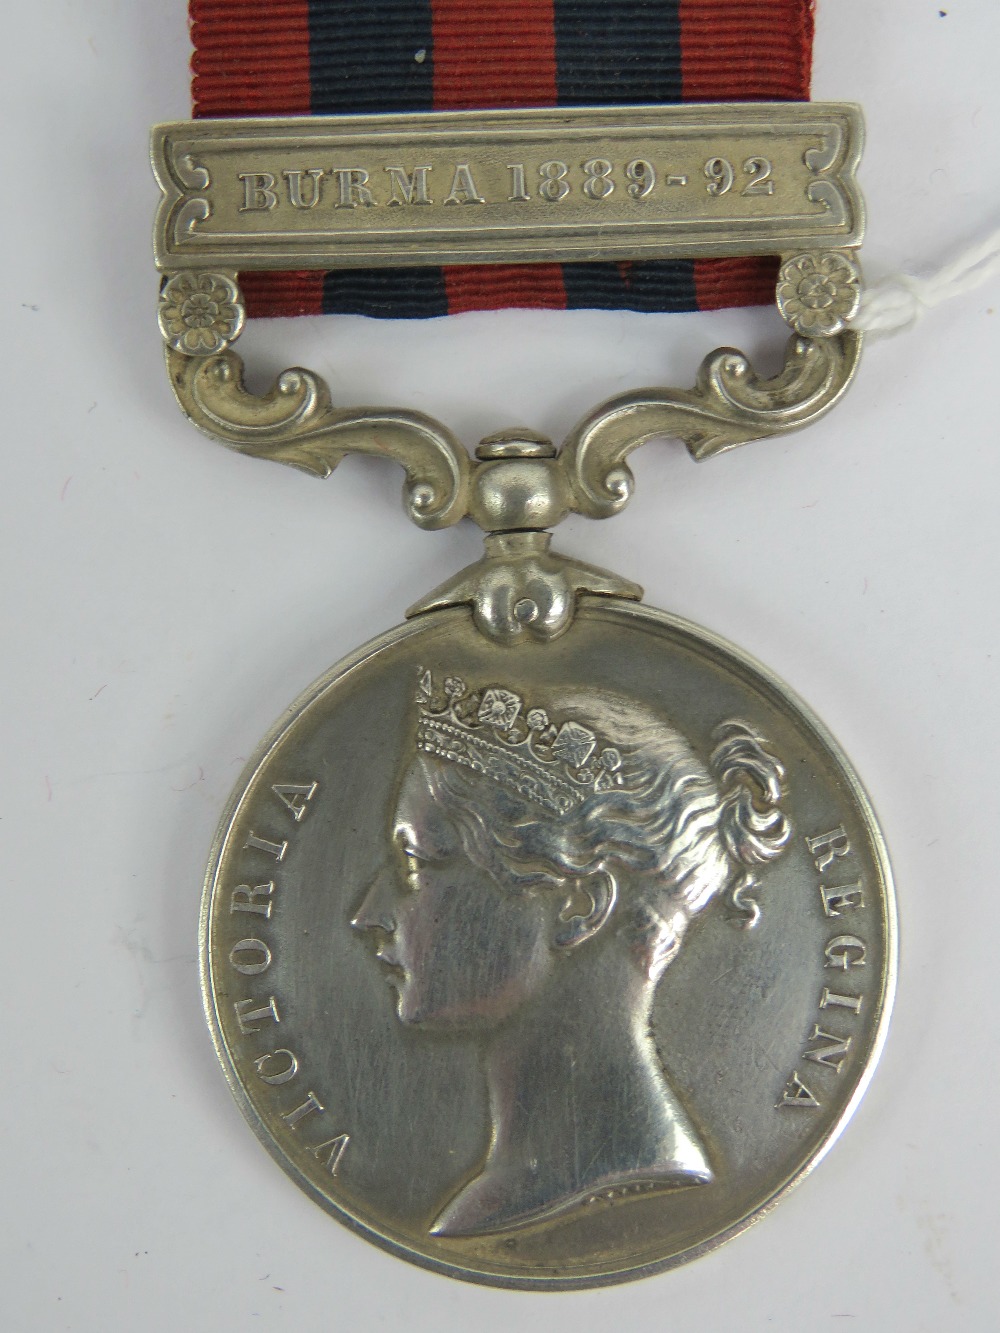 A Queen Victoria medal with 1889-92 Burma clasp, to 1065 Pte.